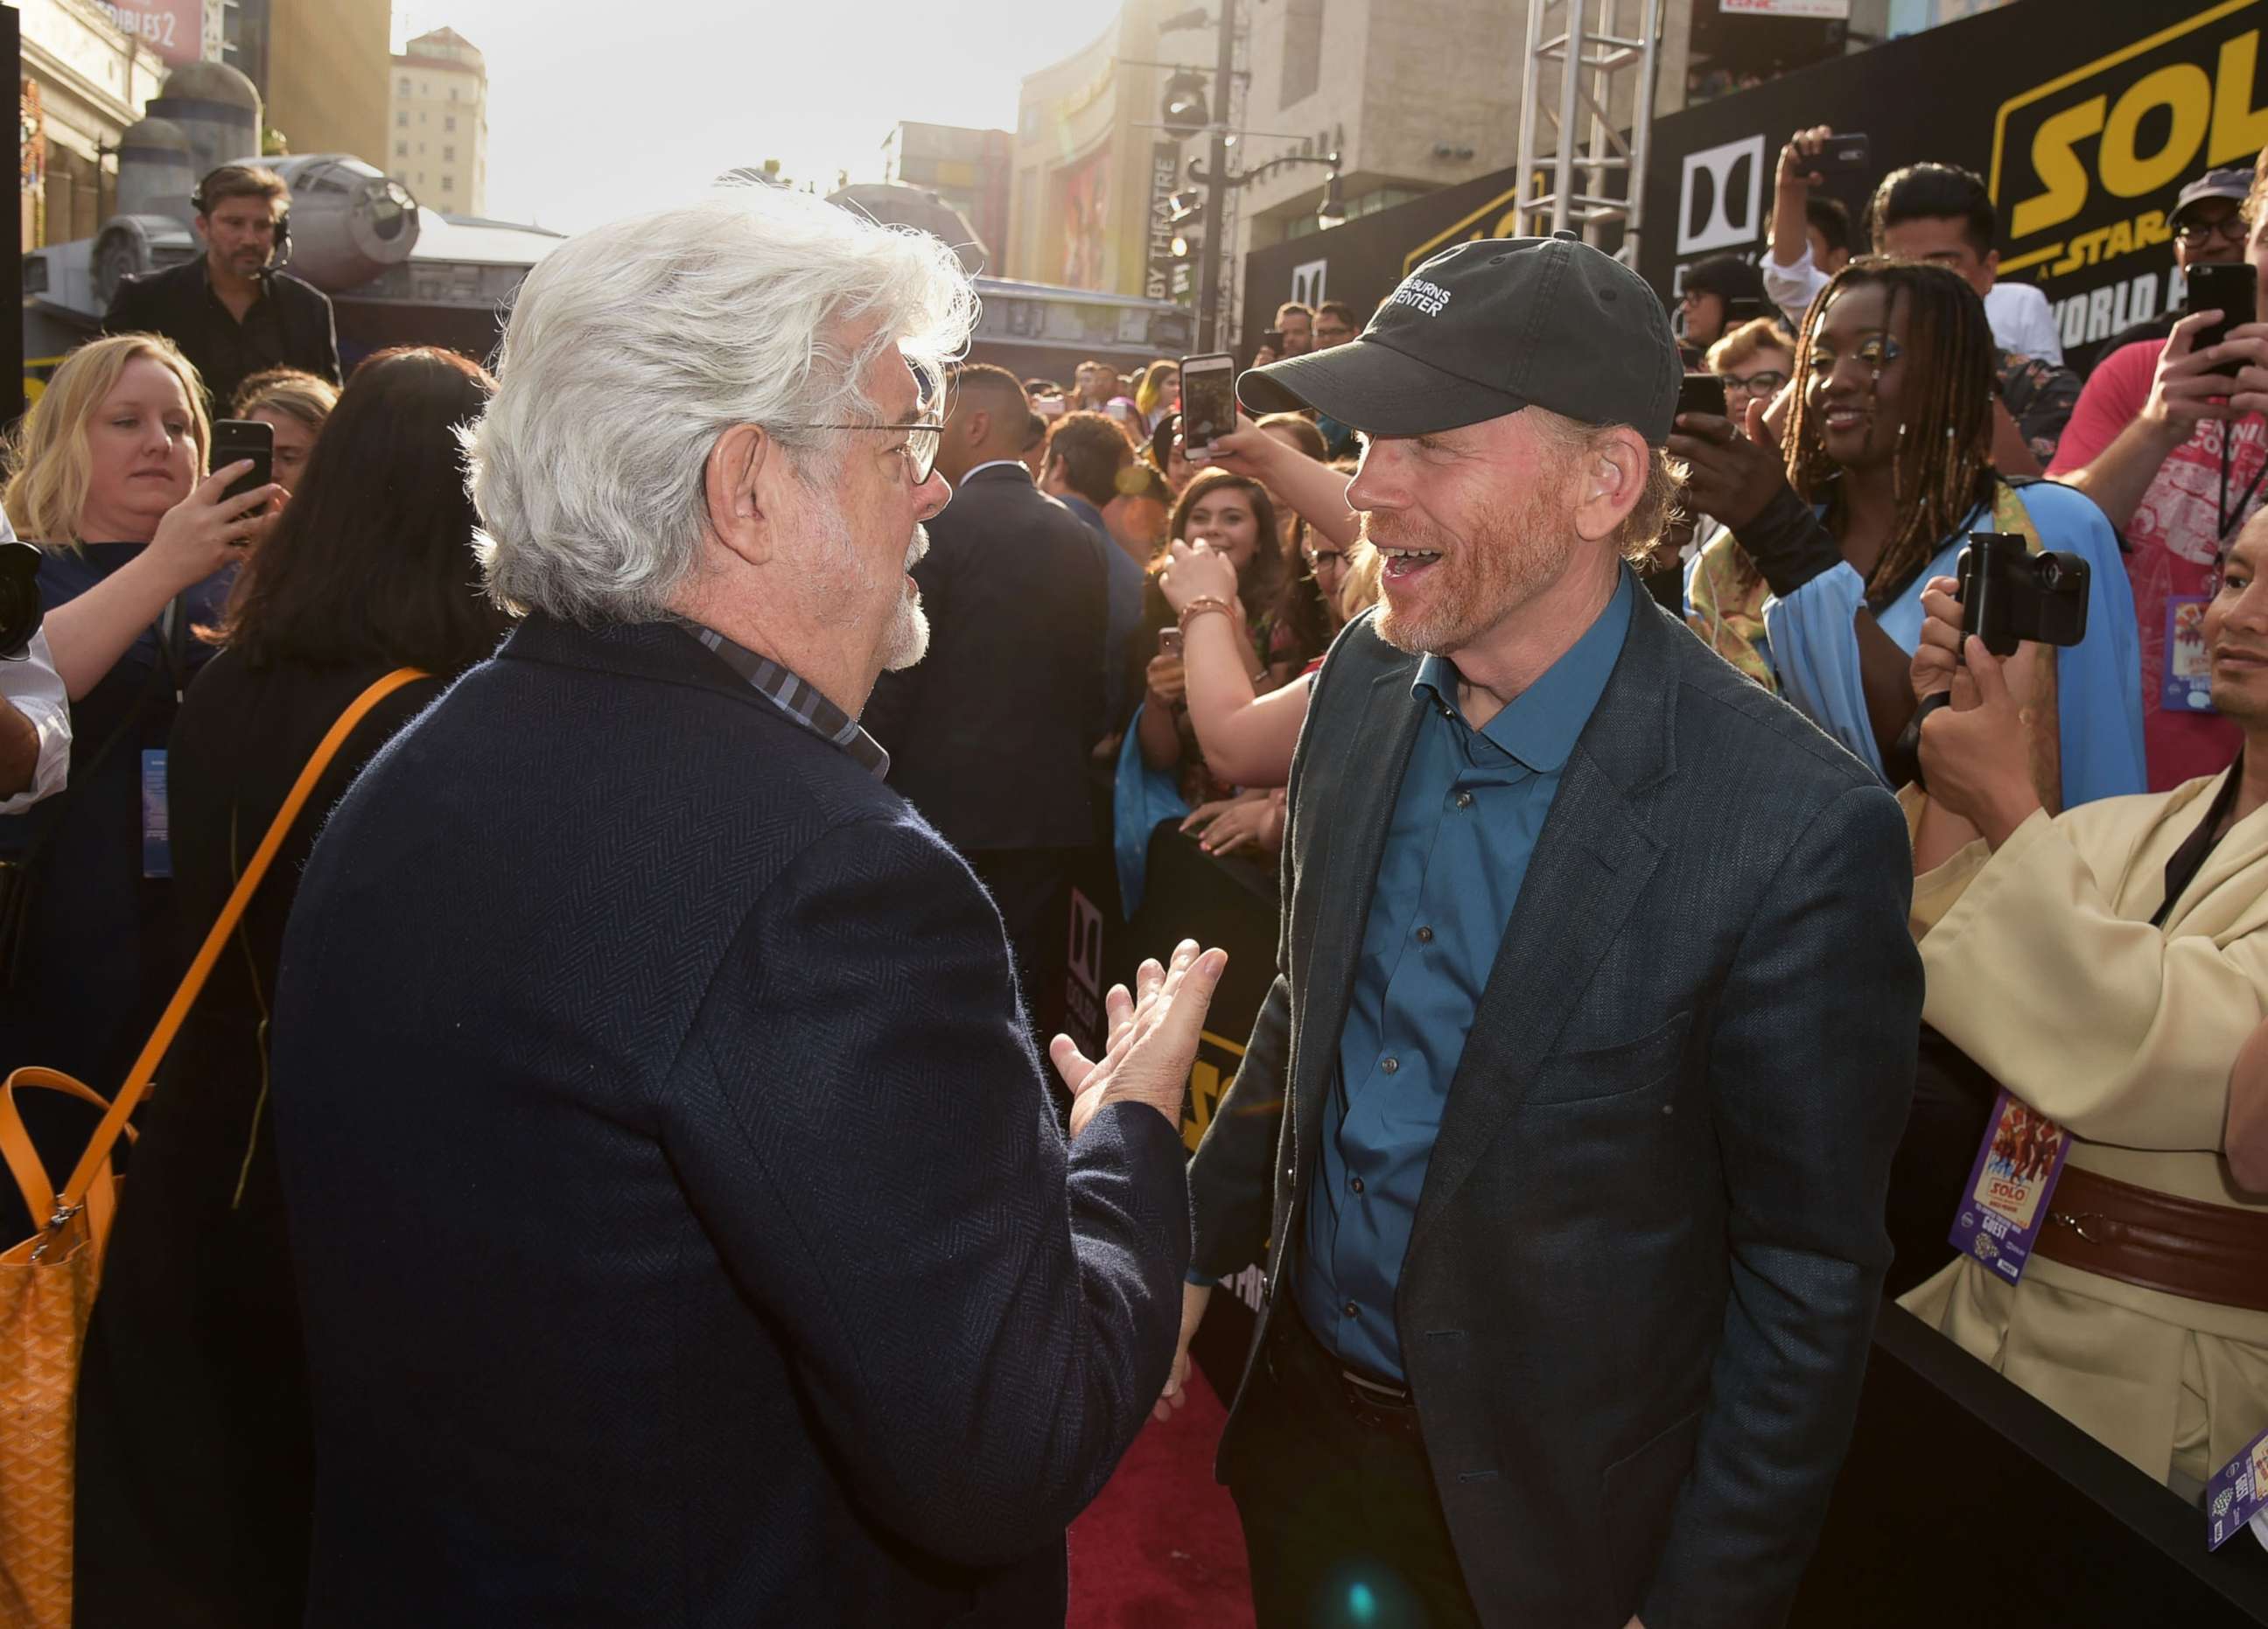 PHOTO: George Lucas and Ron Howard attend the premiere of "Solo: A Star Wars Story" at the El Capitan Theatre on May 10, 2018 in Hollywood, Calif.